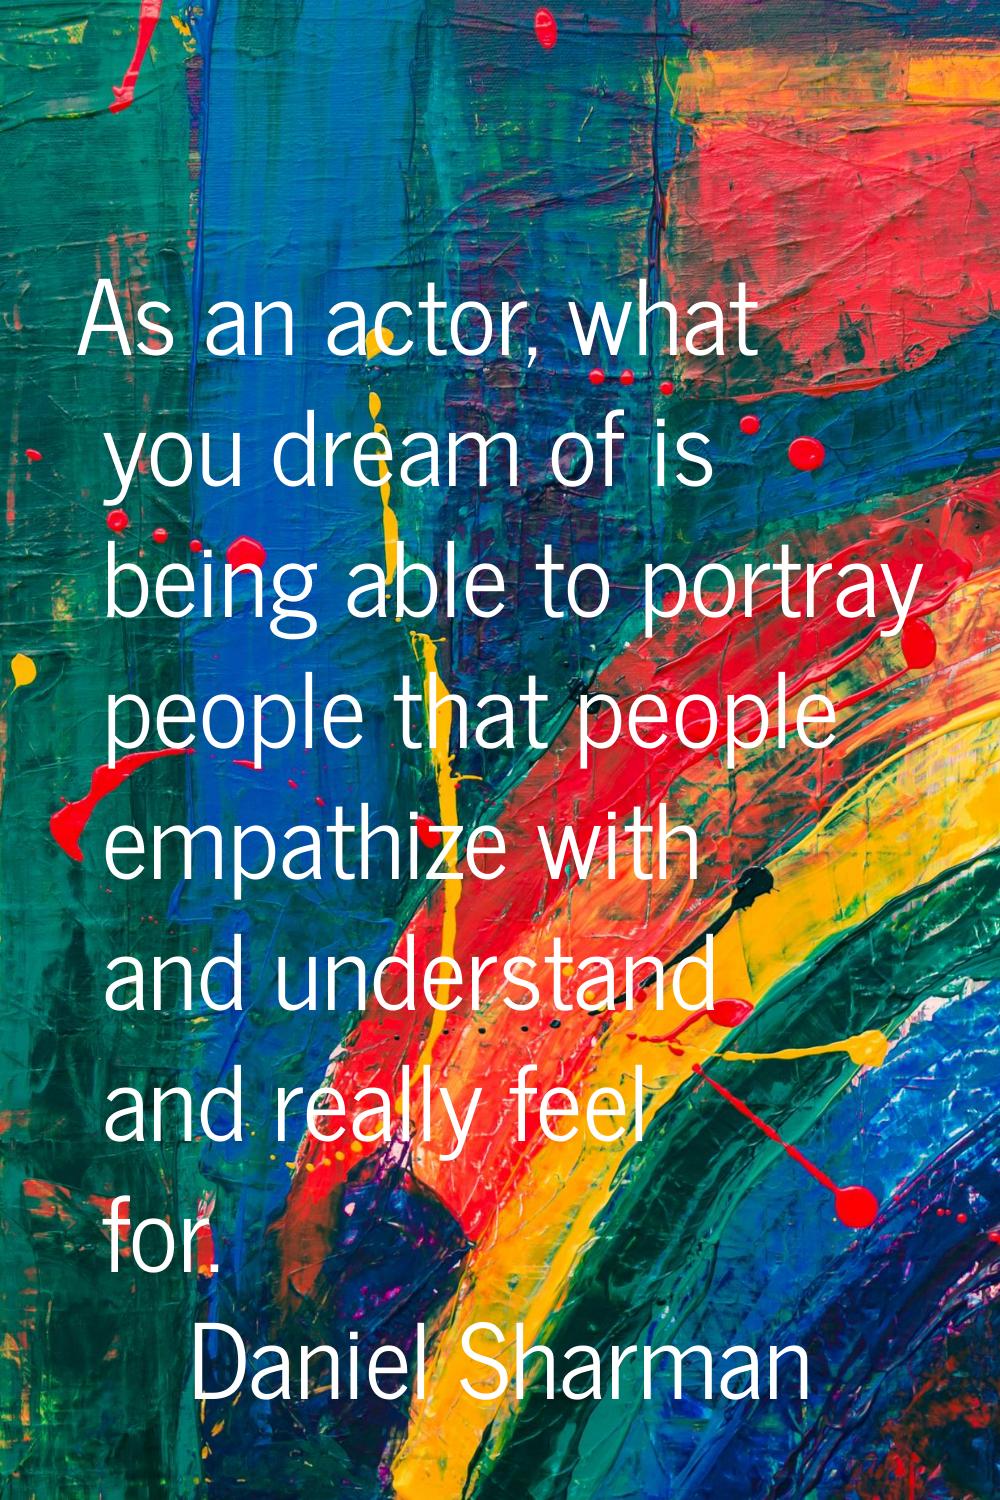 As an actor, what you dream of is being able to portray people that people empathize with and under